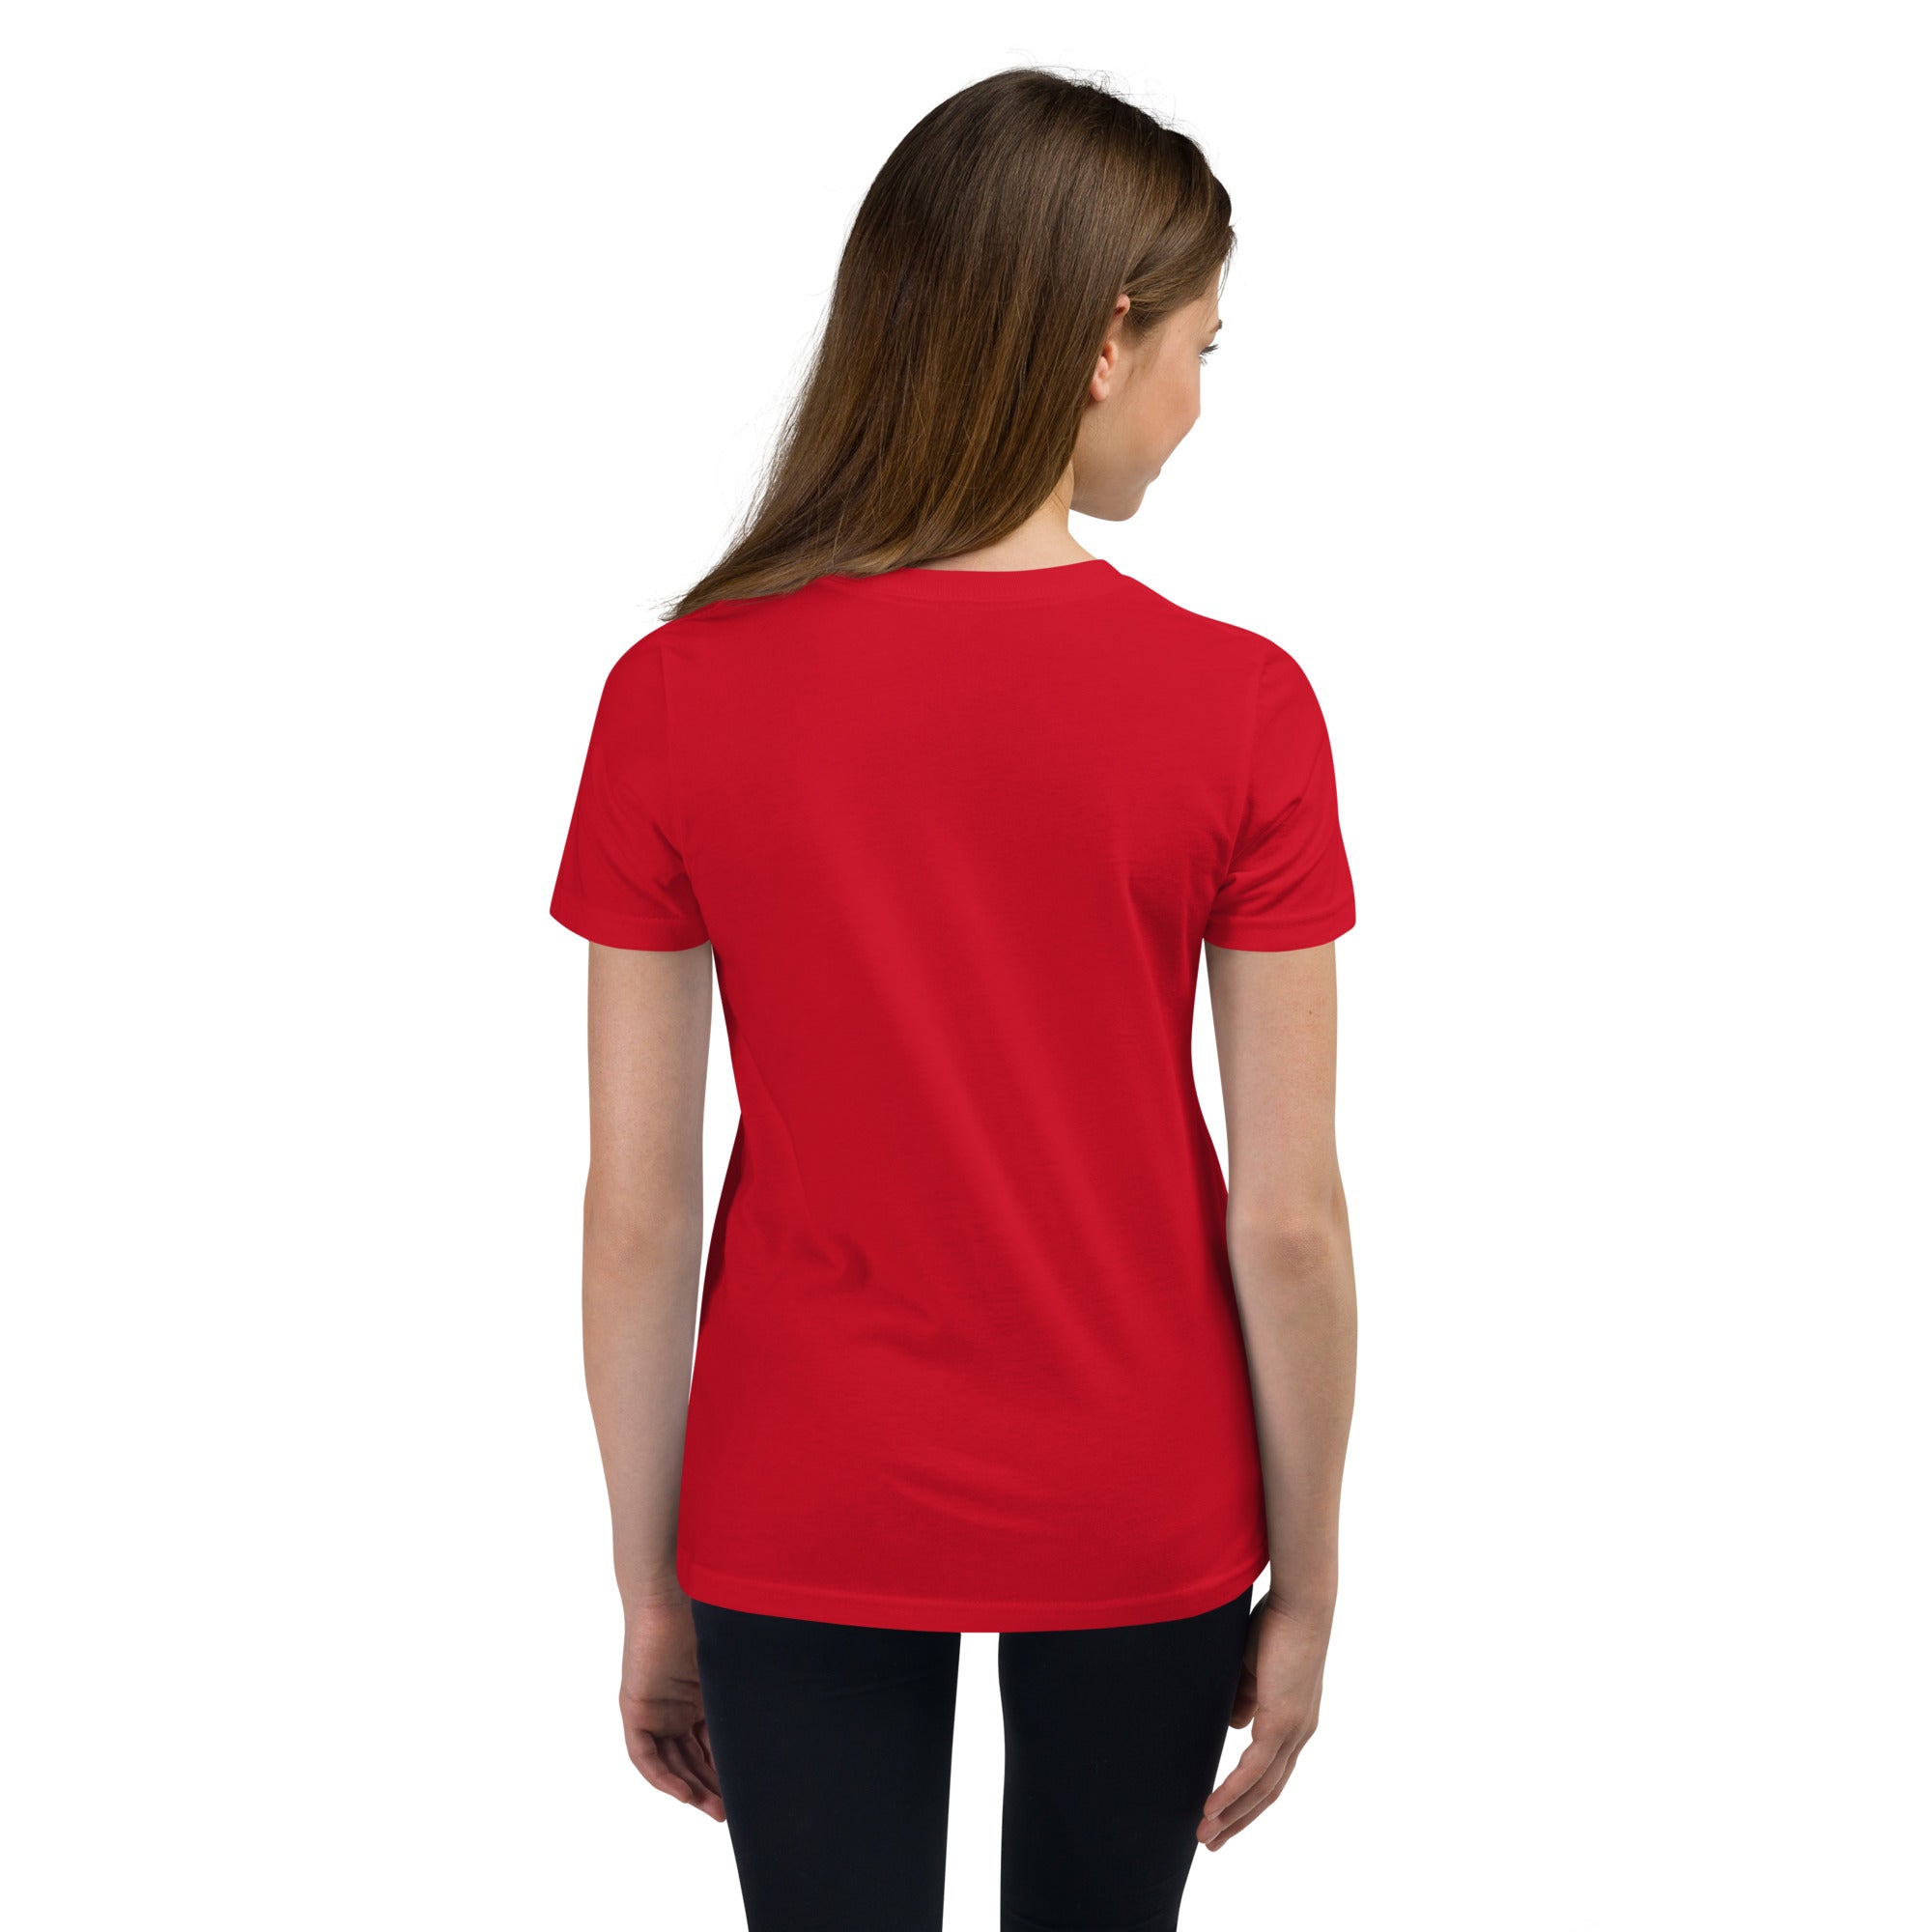 Lake Forest Logo W - Red Youth Short Sleeve T-Shirt